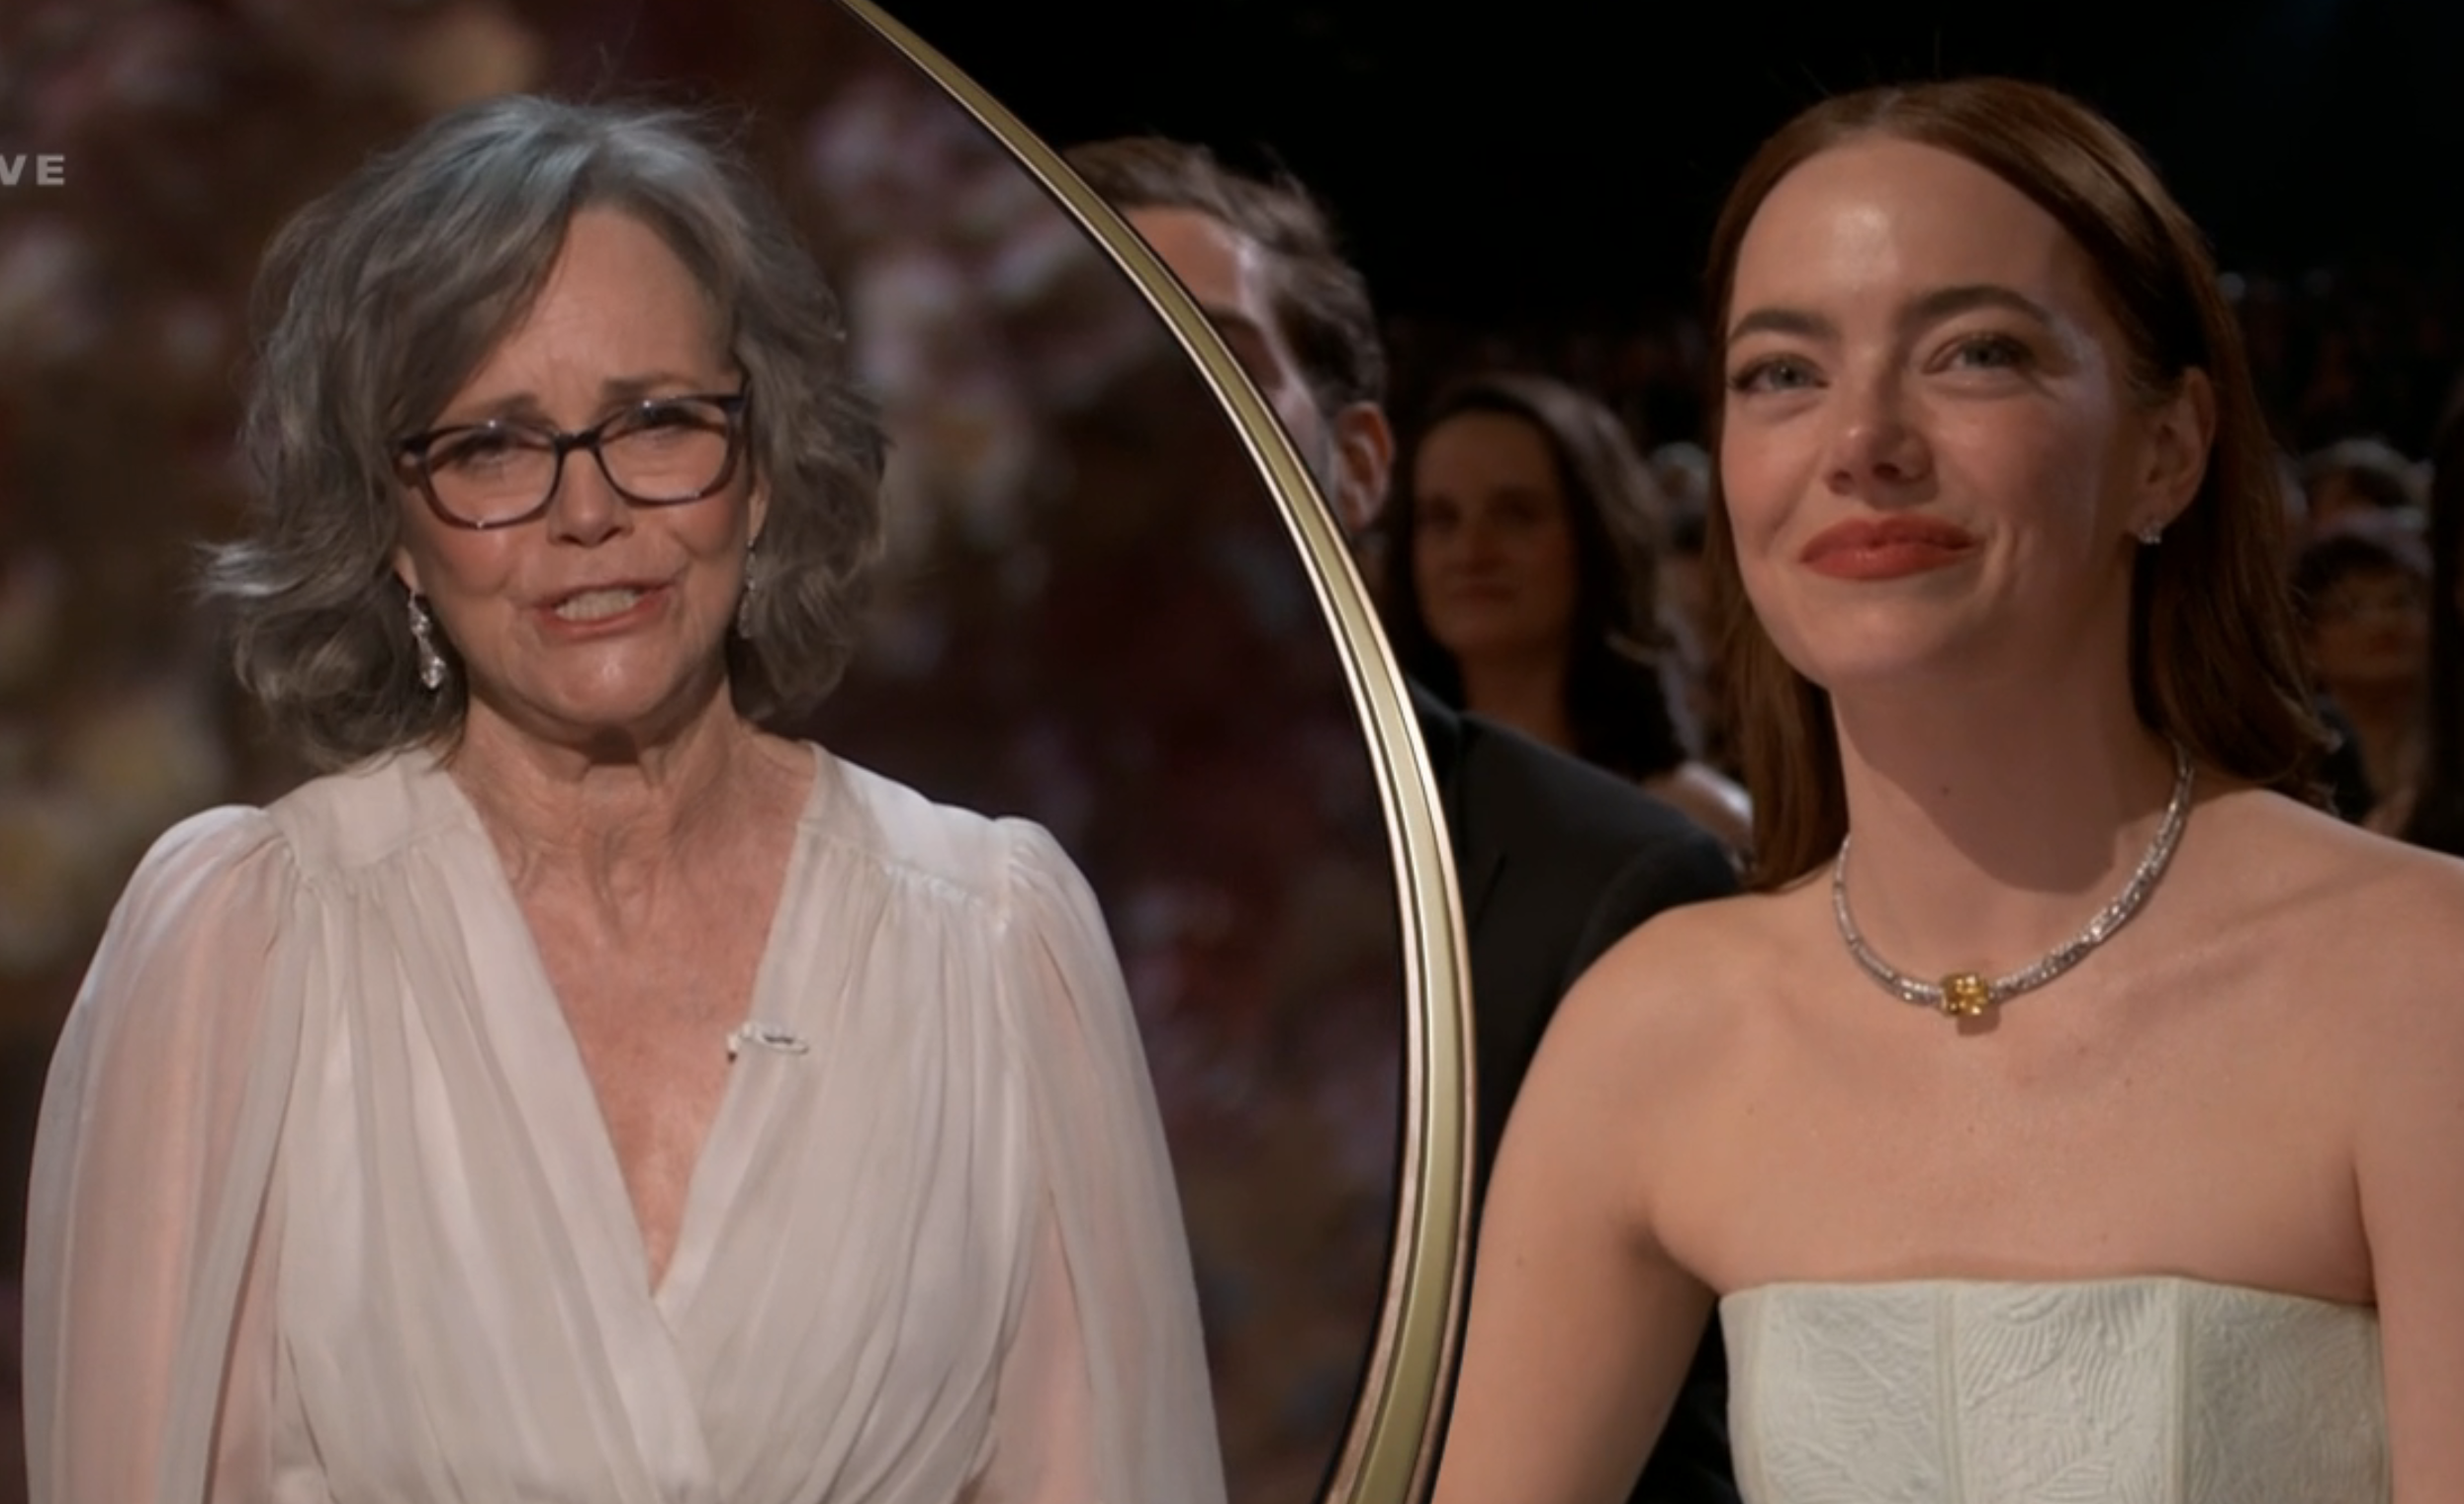 Sally Field and Emma Stone smiling as they look at one another during the presentation